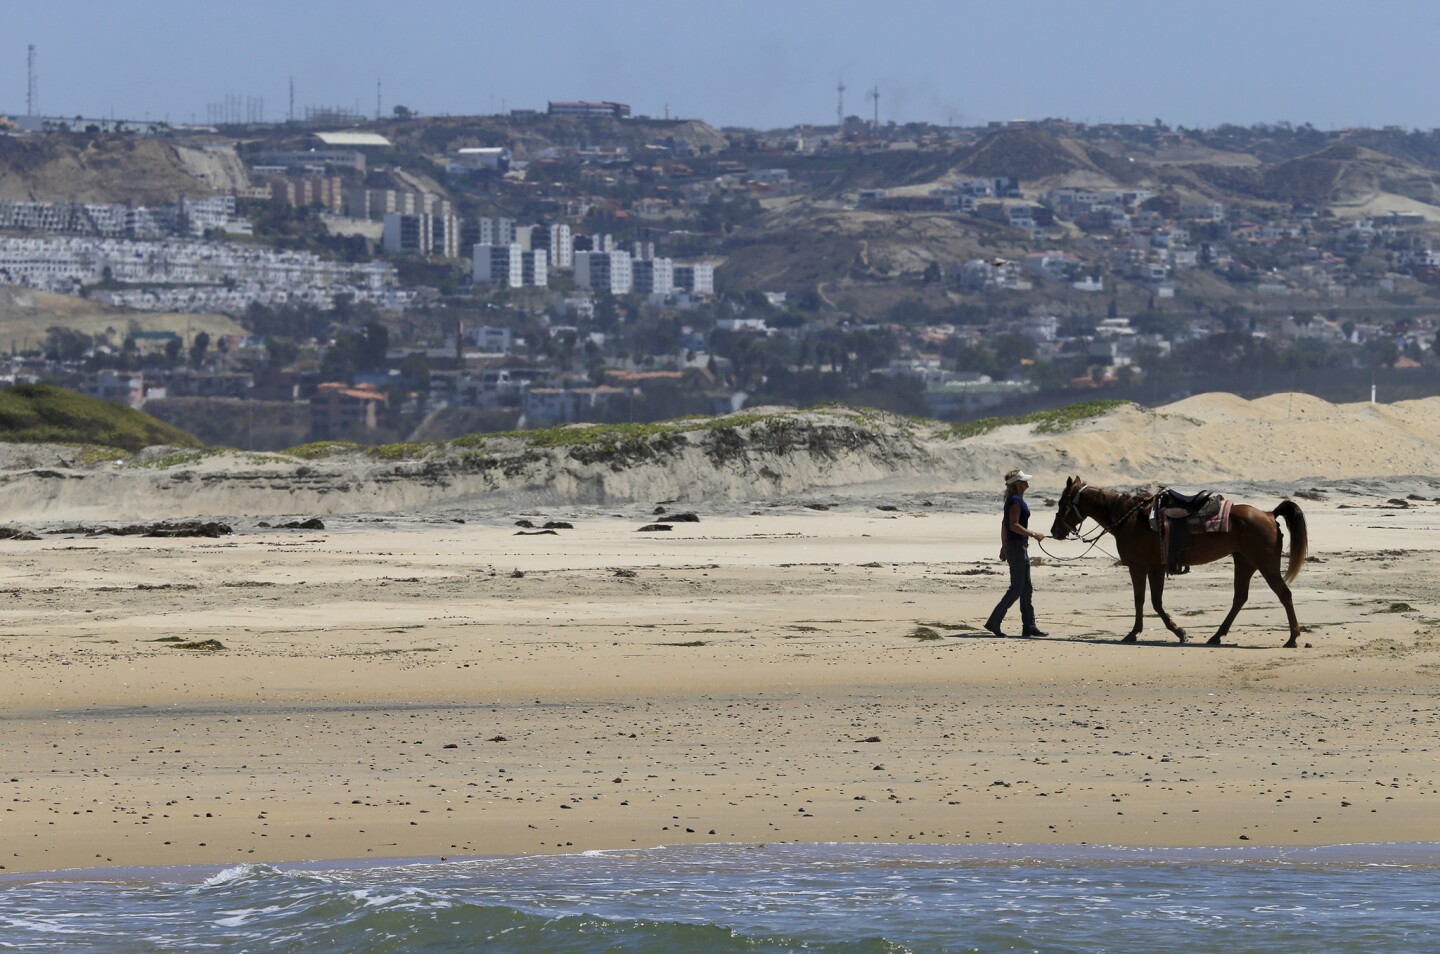 A woman takes a break from riding her horse on Imperial Beach, one of only a few places along the coast where horses are allowed.